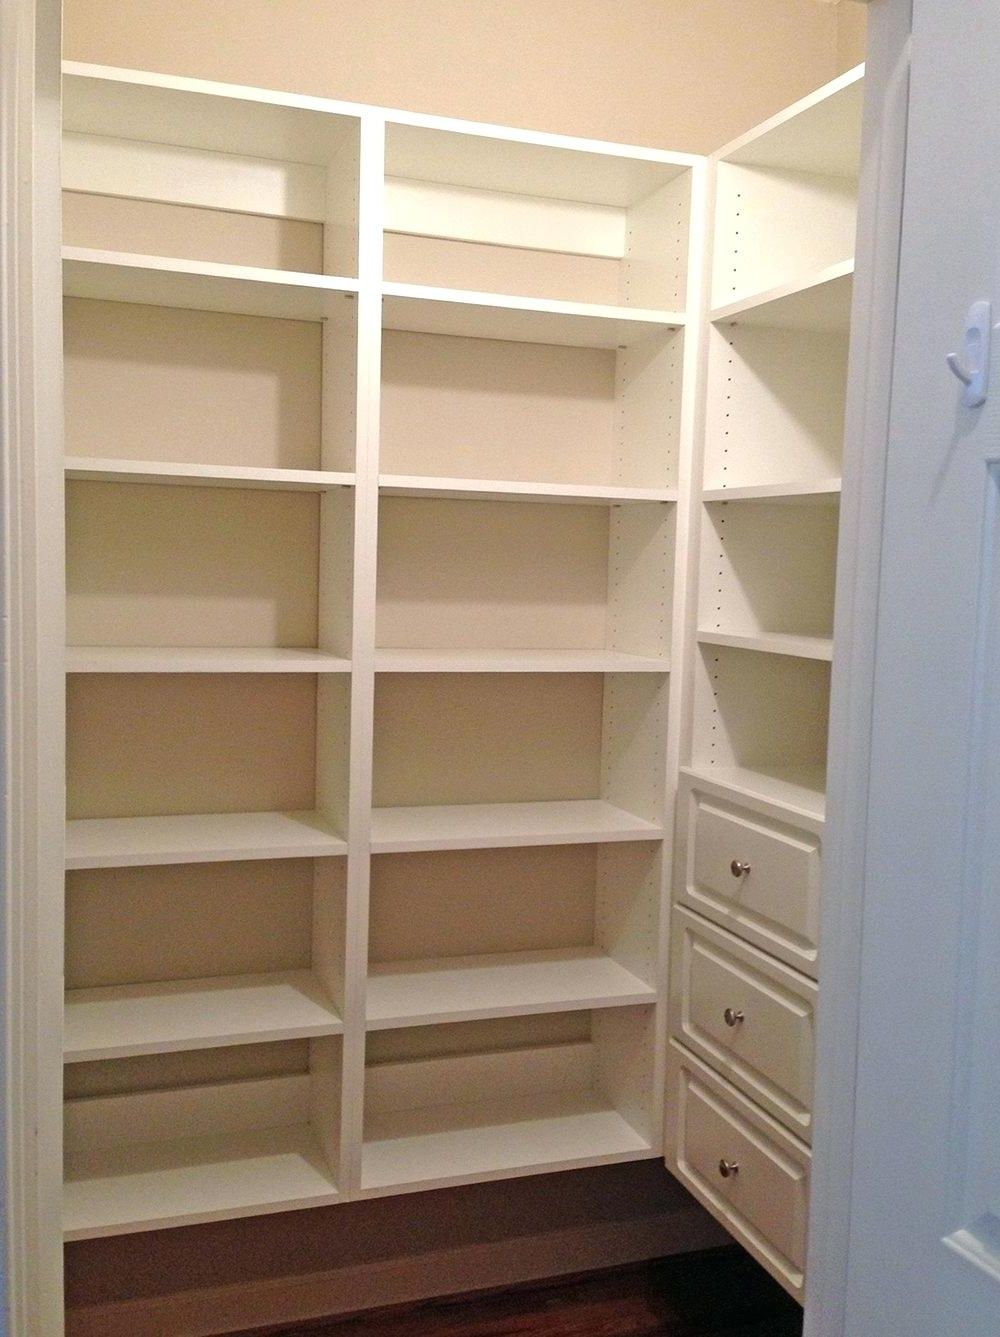 Closet ~ Pantry Closet Shelving Pantry Closet Shelving Systems Throughout Fashionable Home Shelving Systems (View 13 of 15)